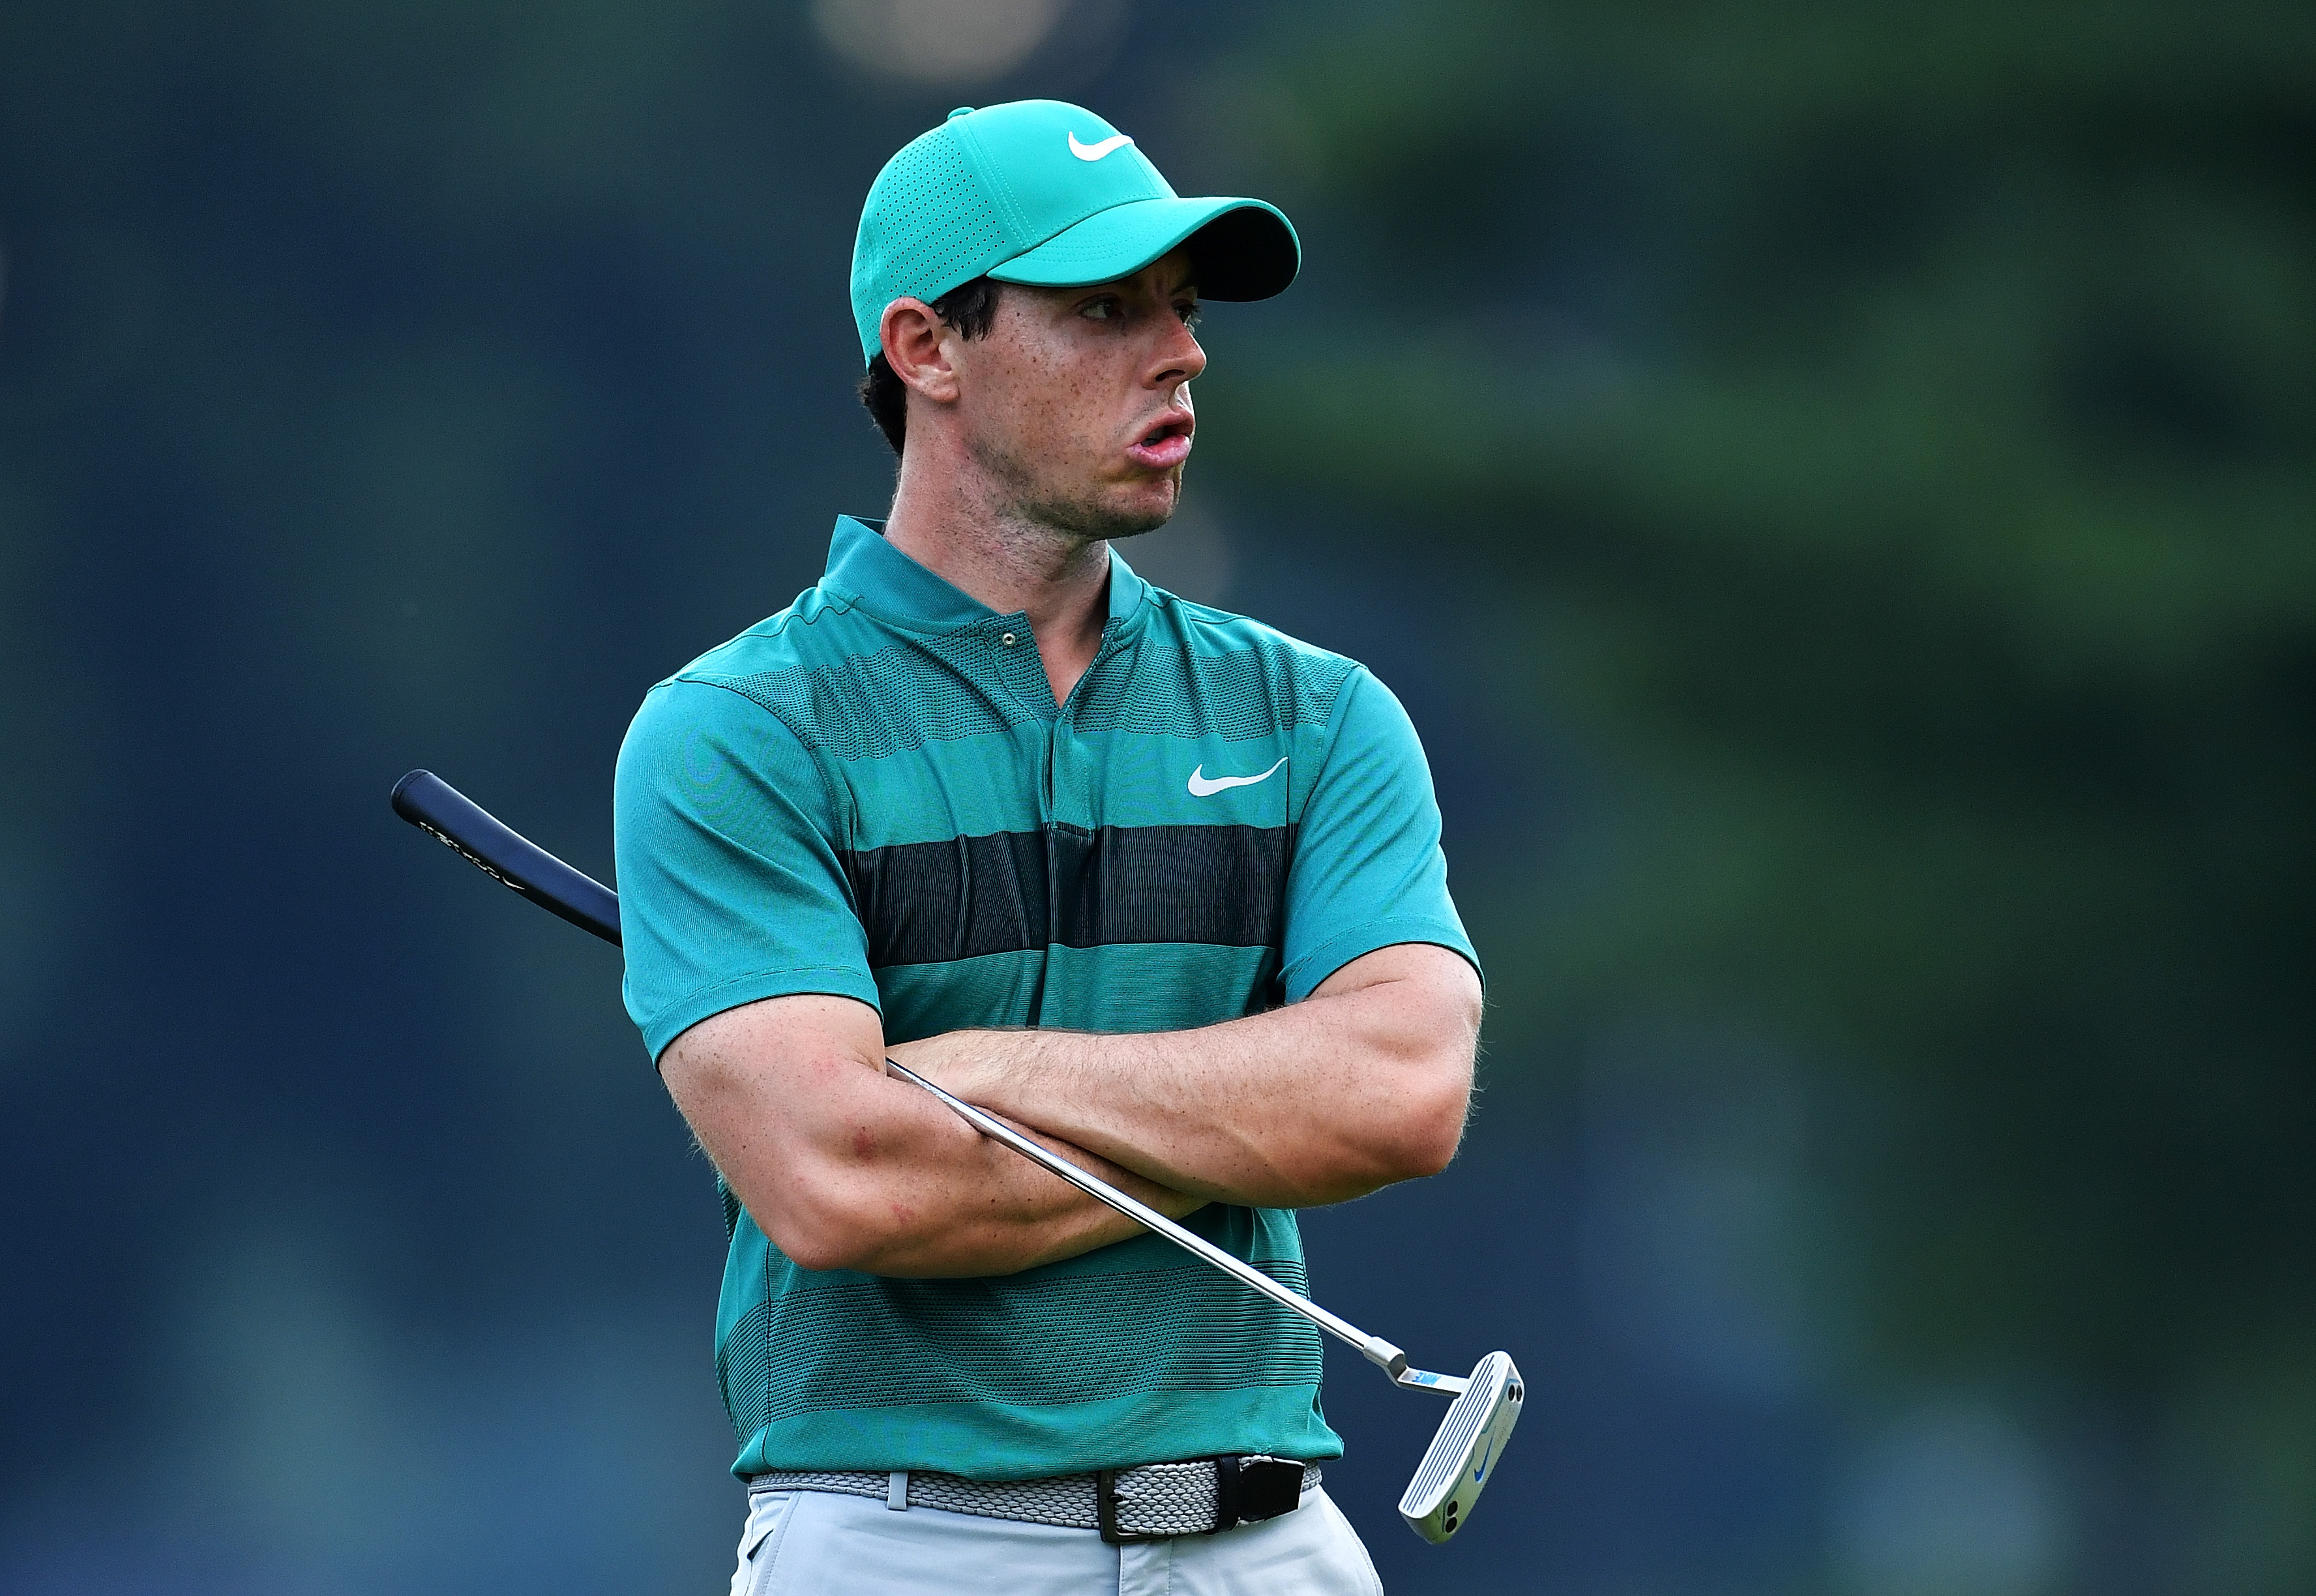 Rory McIlroy confirms he's ditching Nike for Scotty Cameron, but likely won't sign new equipment deal anytime | This is the Loop | Golf Digest